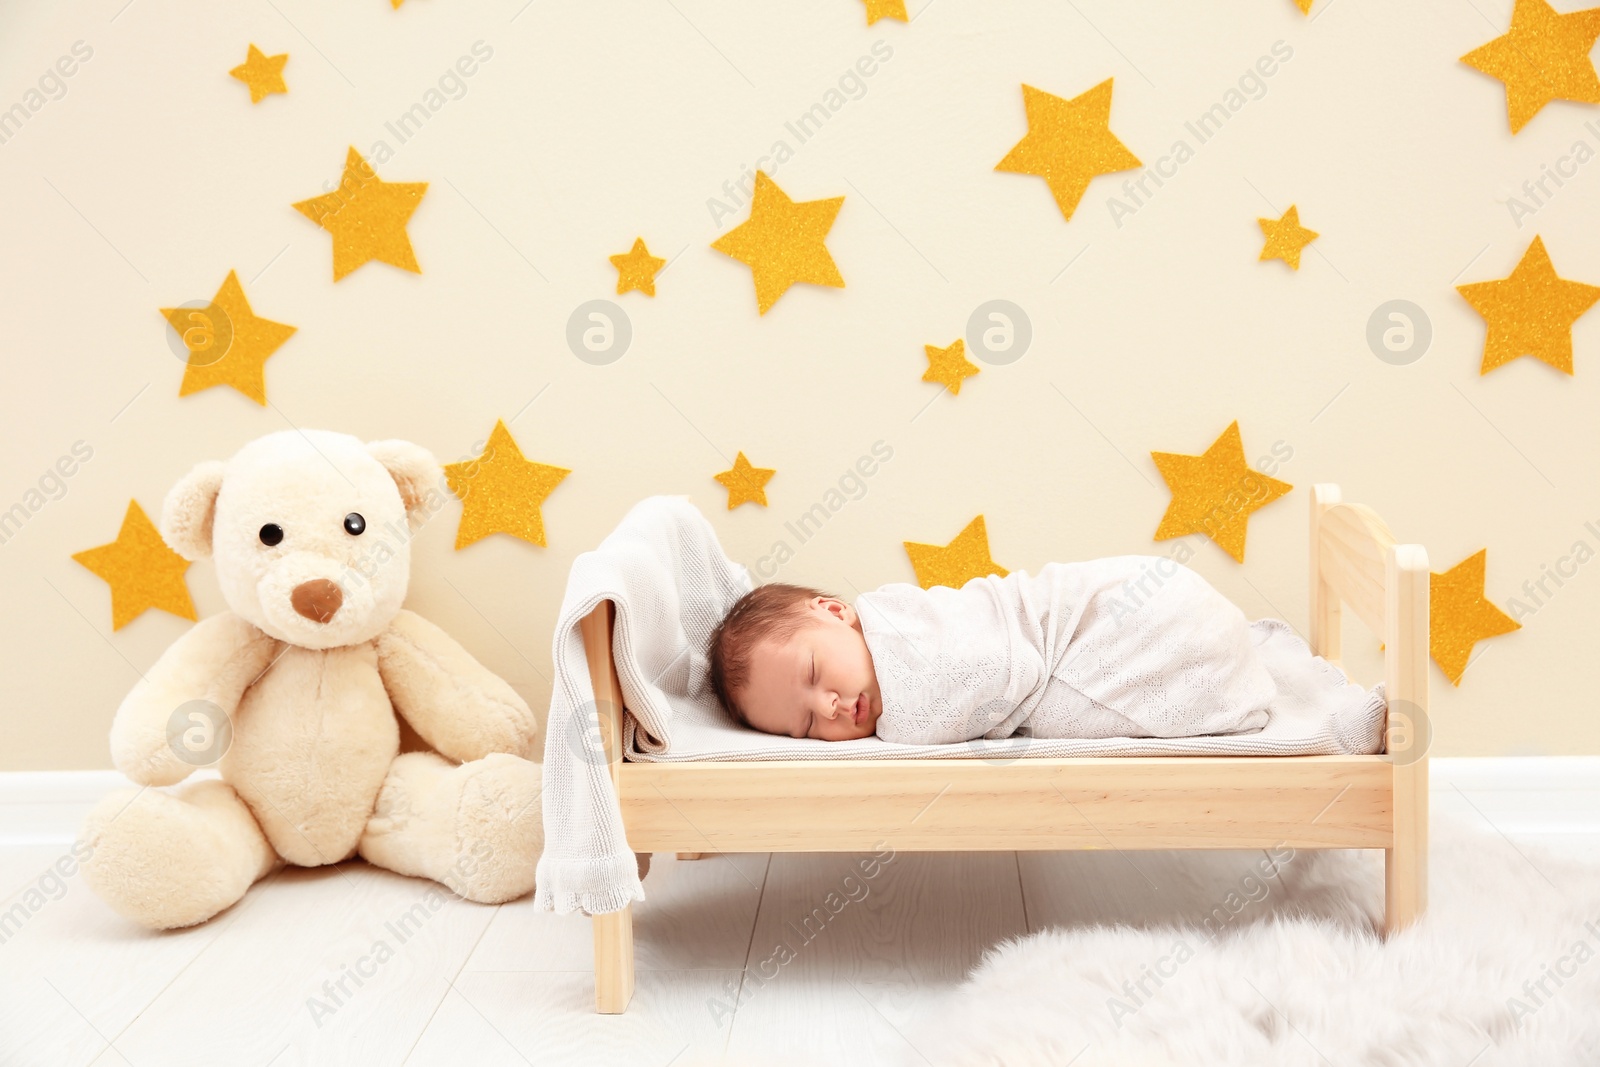 Photo of Adorable newborn baby sleeping in small bed